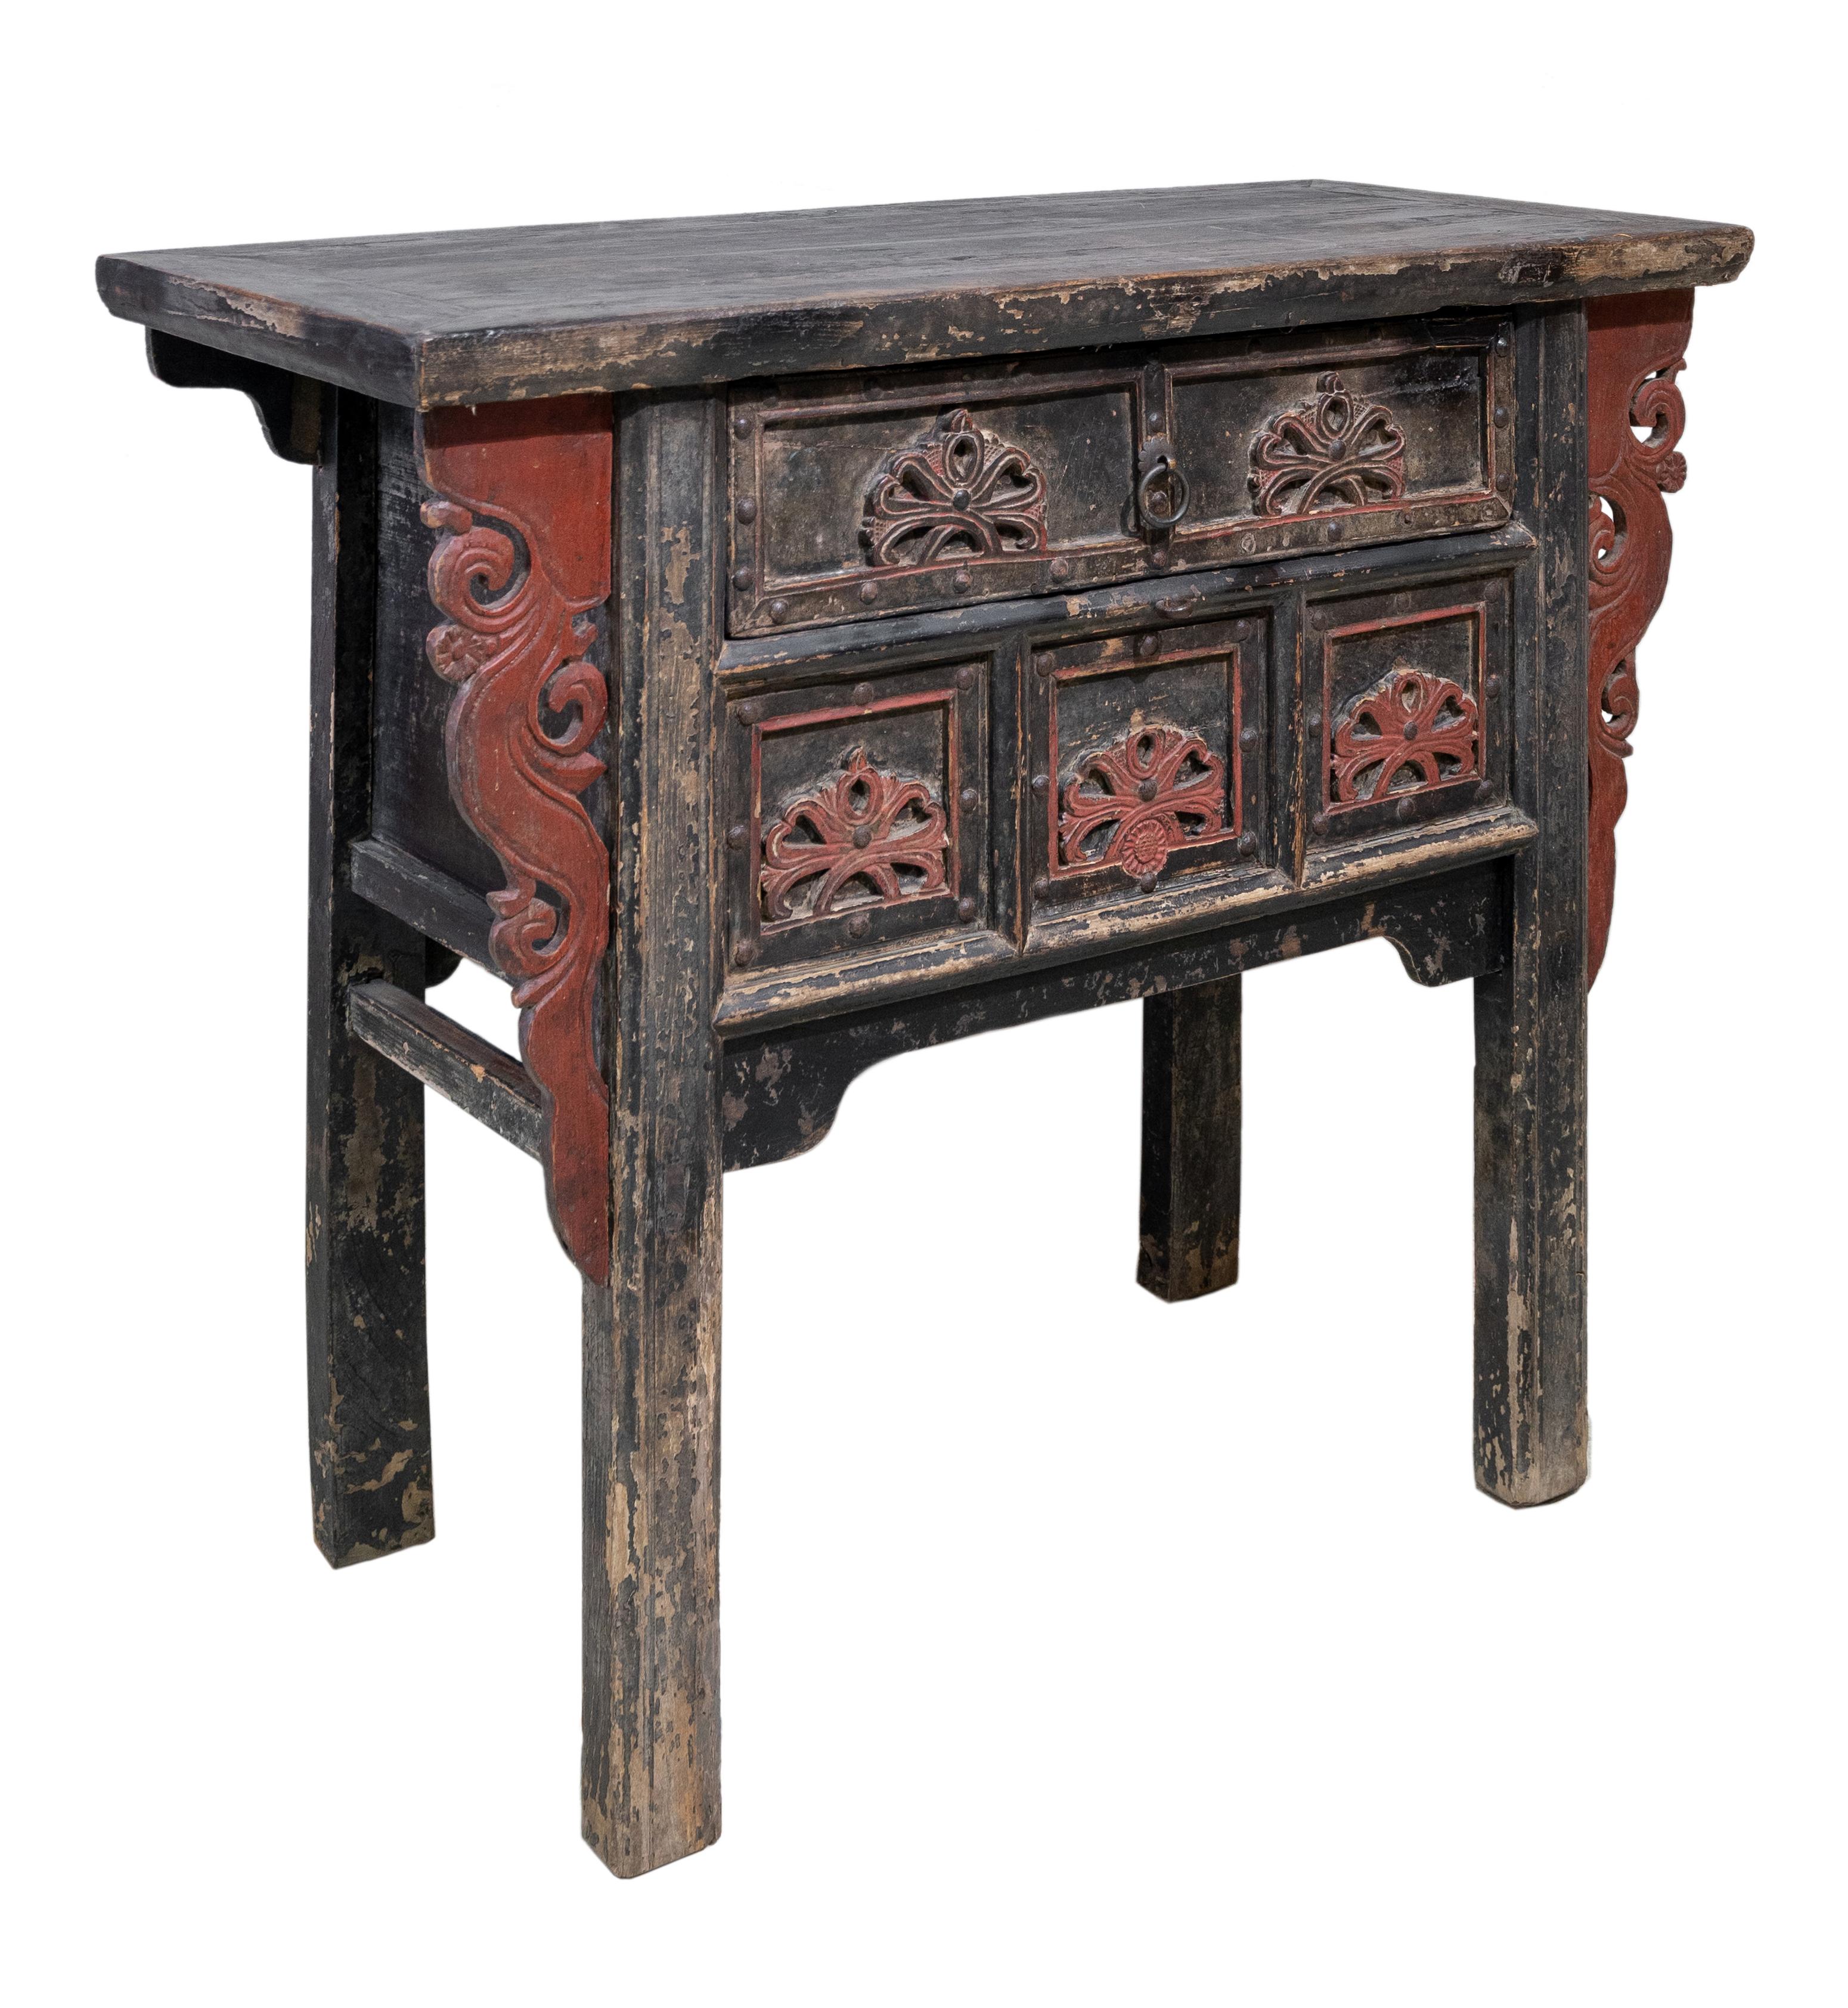 An excellent antique coffer table from Shanxi province, China. In very good condition and has beautiful original patina and color which we had left untouched. It has one long drawer and a hidden compartment below. The ribbon-like patterns on the